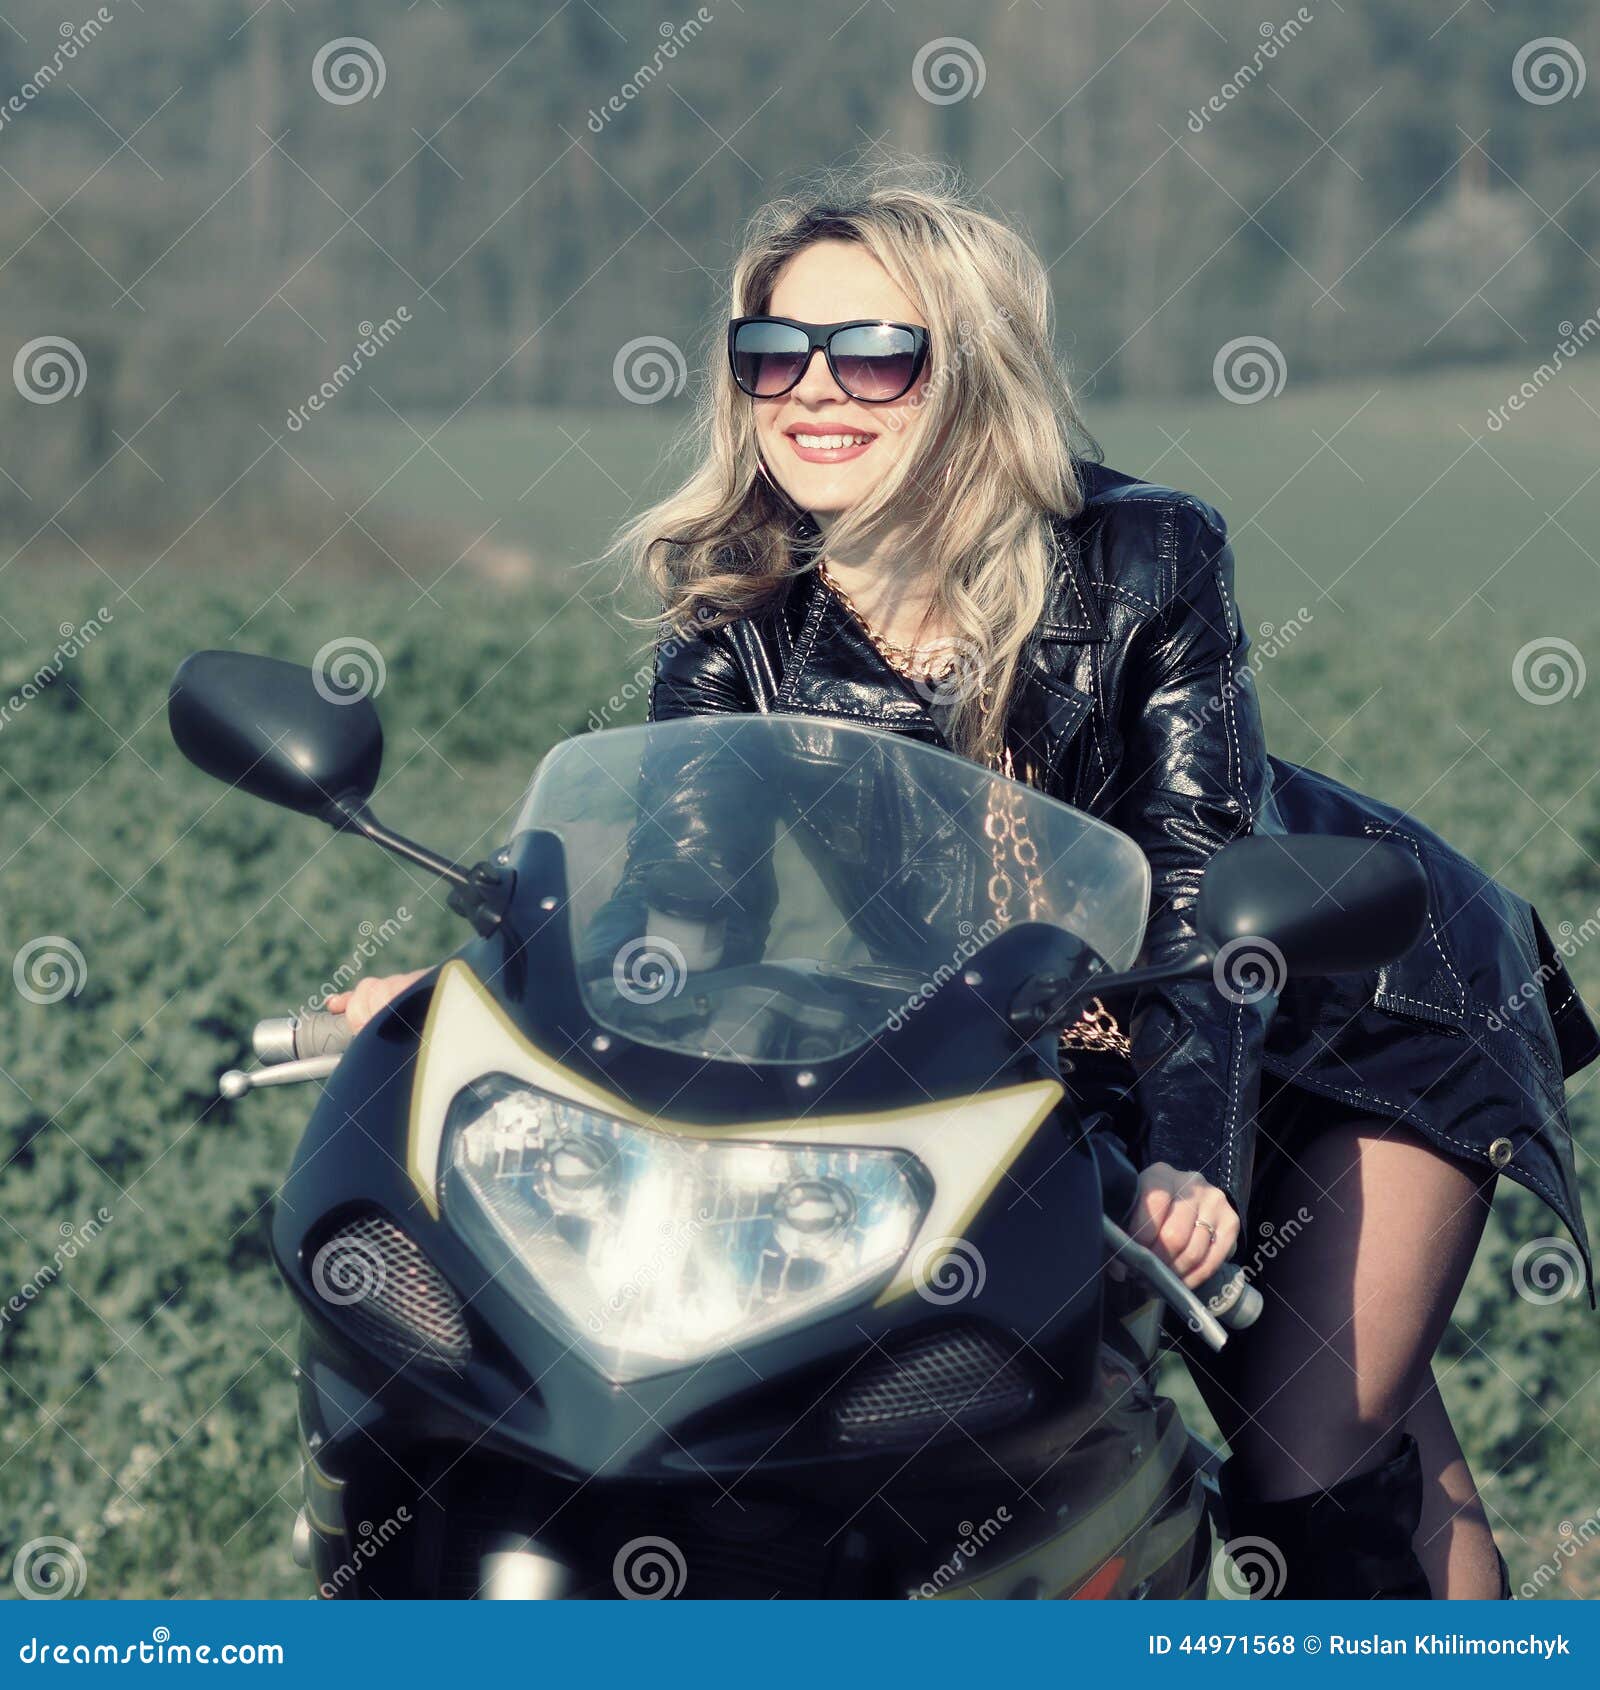 Blonde Woman in Sunglasses on a Sports Motorcycle Stock Photo - Image ...